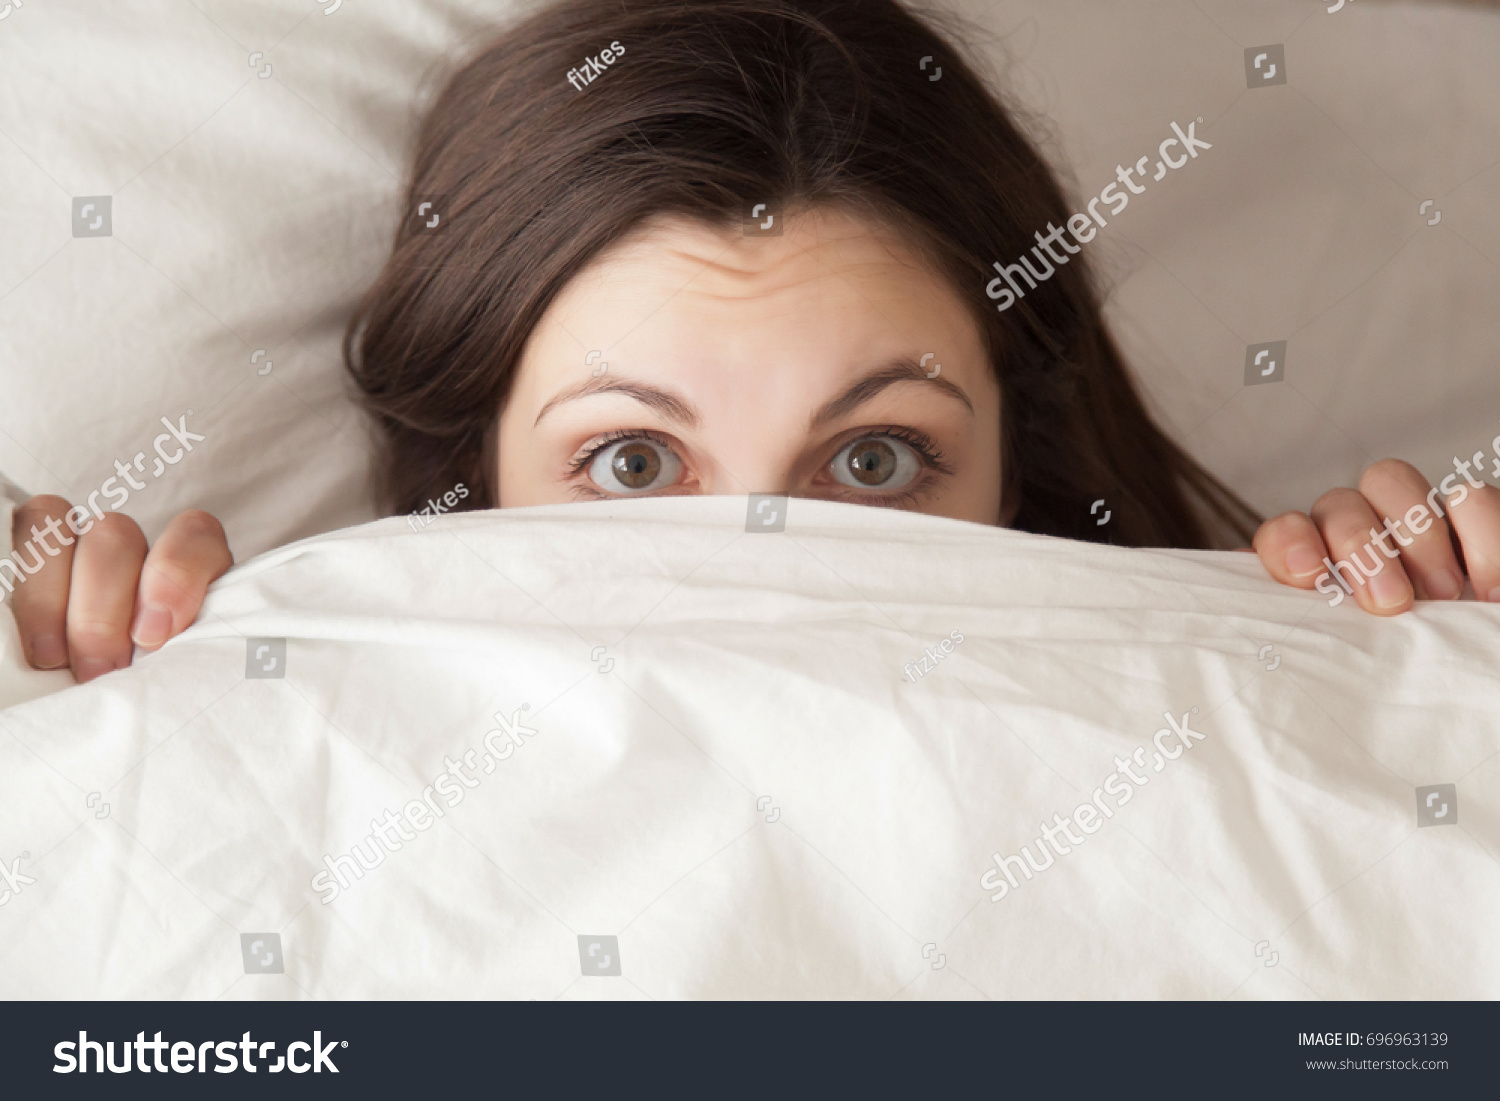 Funny surprised girl covering half of face with white blanket, young scared woman hiding and peeking from duvet, afraid of night monsters, feels embarrassed, wide awake, head shot close up, top view #696963139